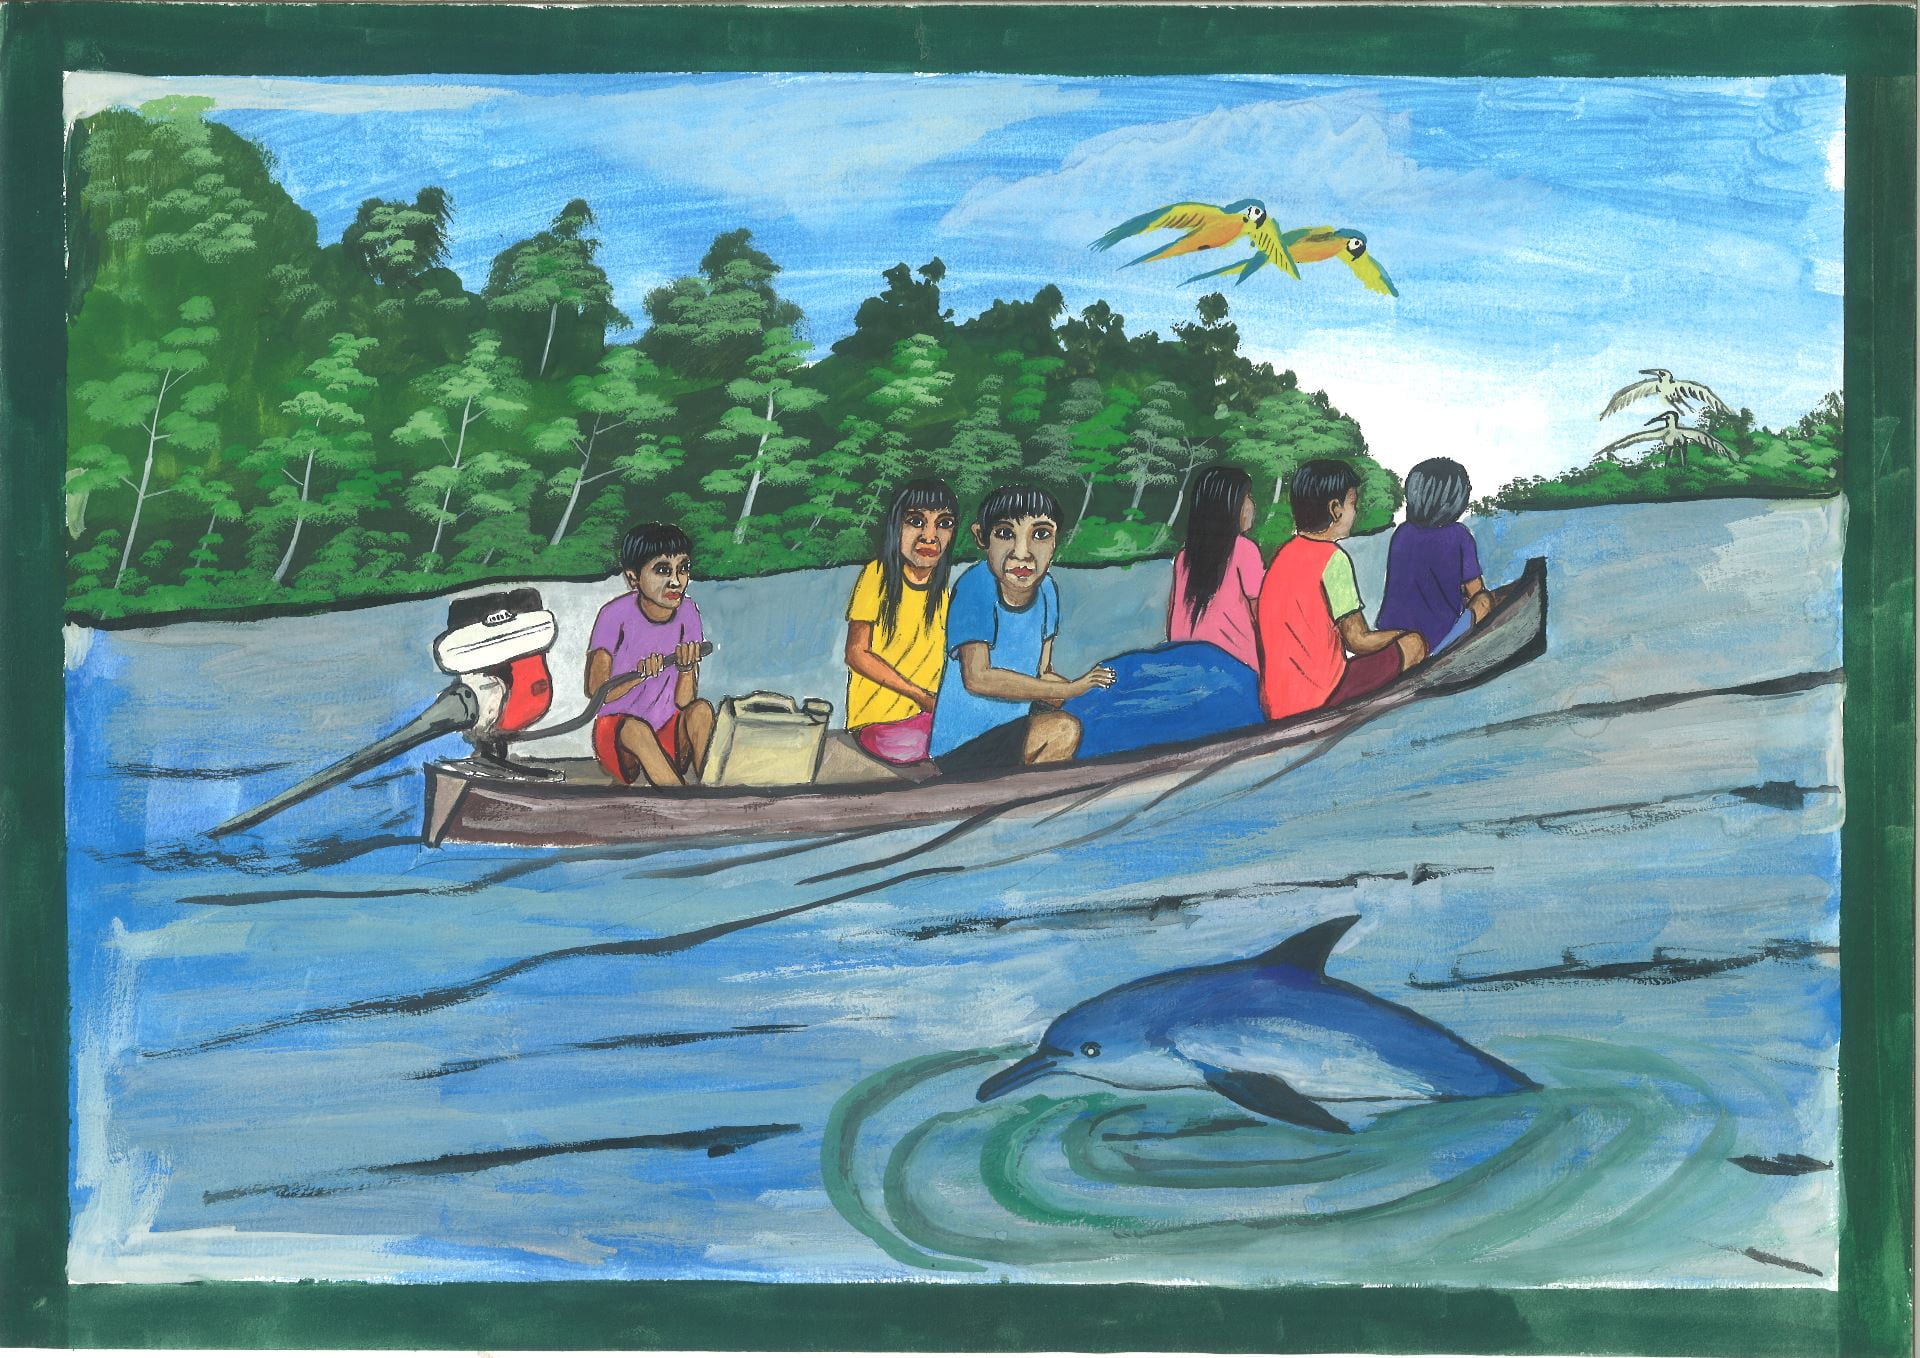 An illustration of a group of South Americans travelling down the Amazon river in a canoe with a pair of birds flying overhead and a large fish jumping out of the water